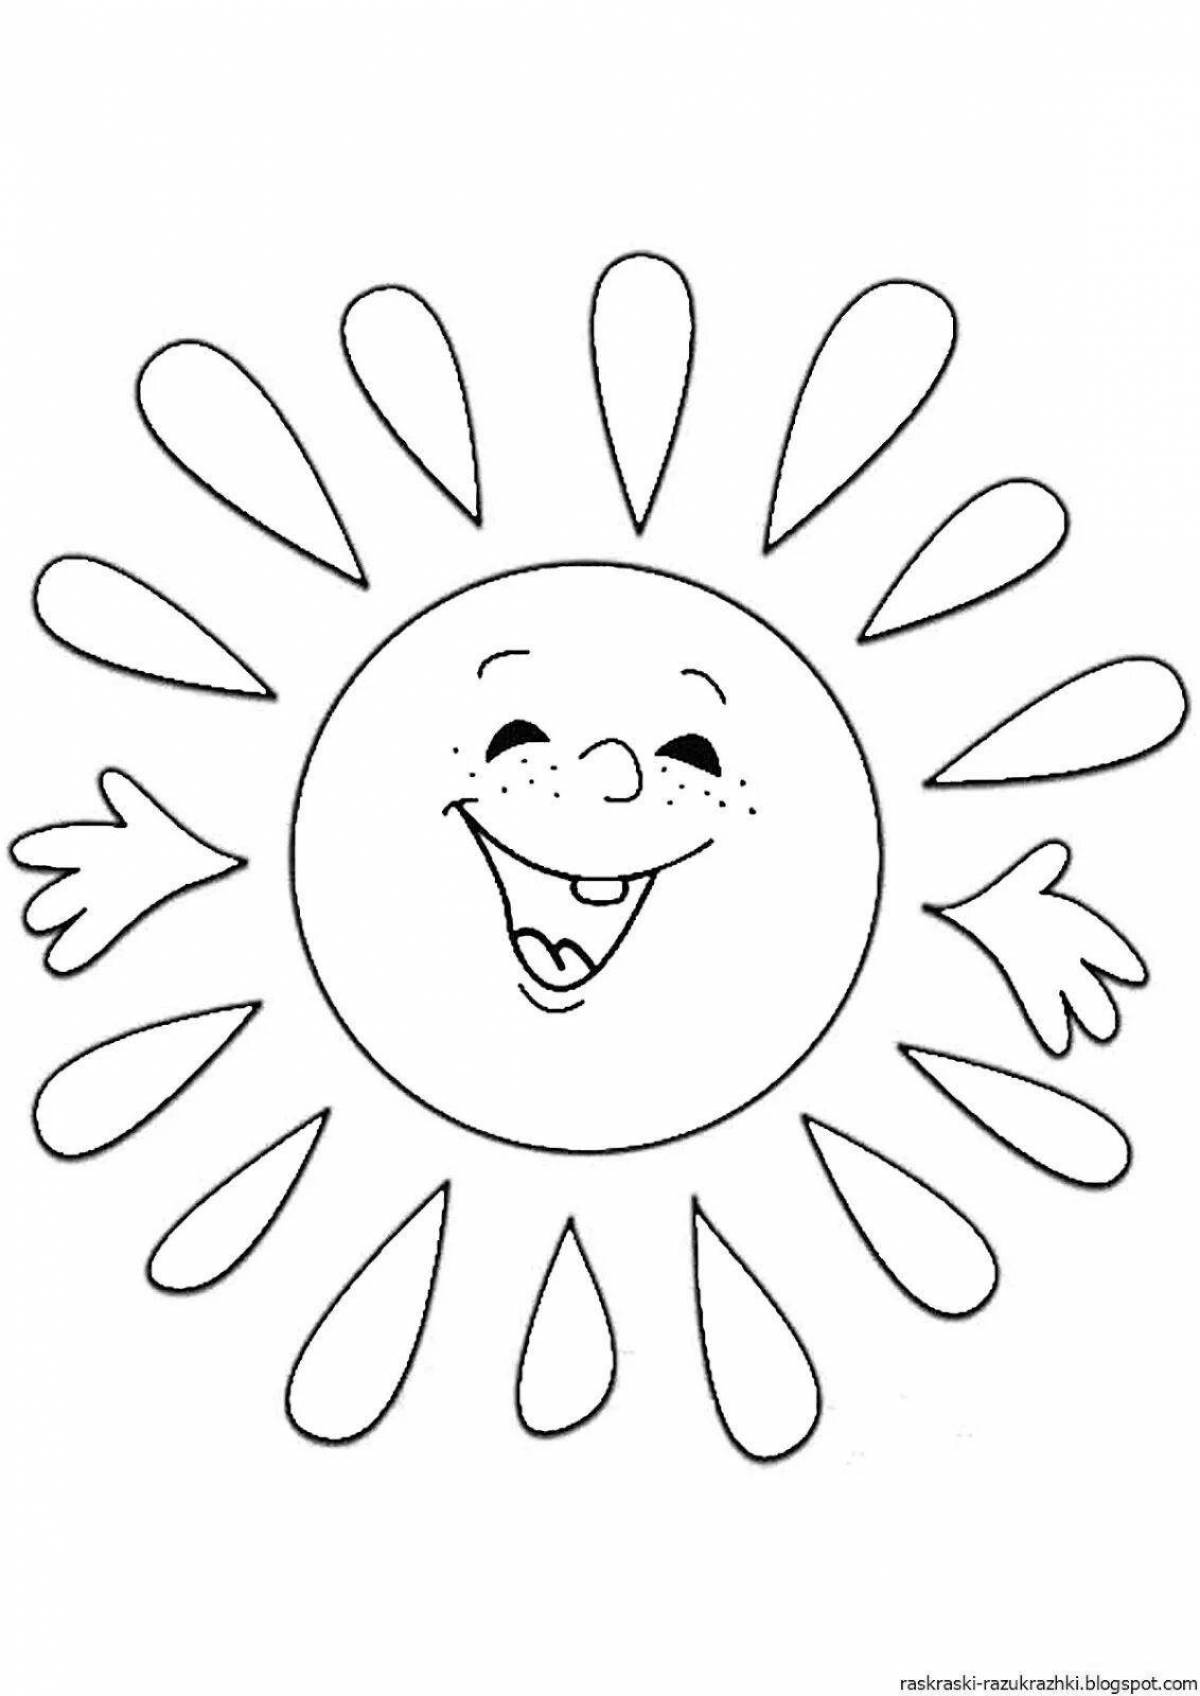 Shiny sun coloring book for kids